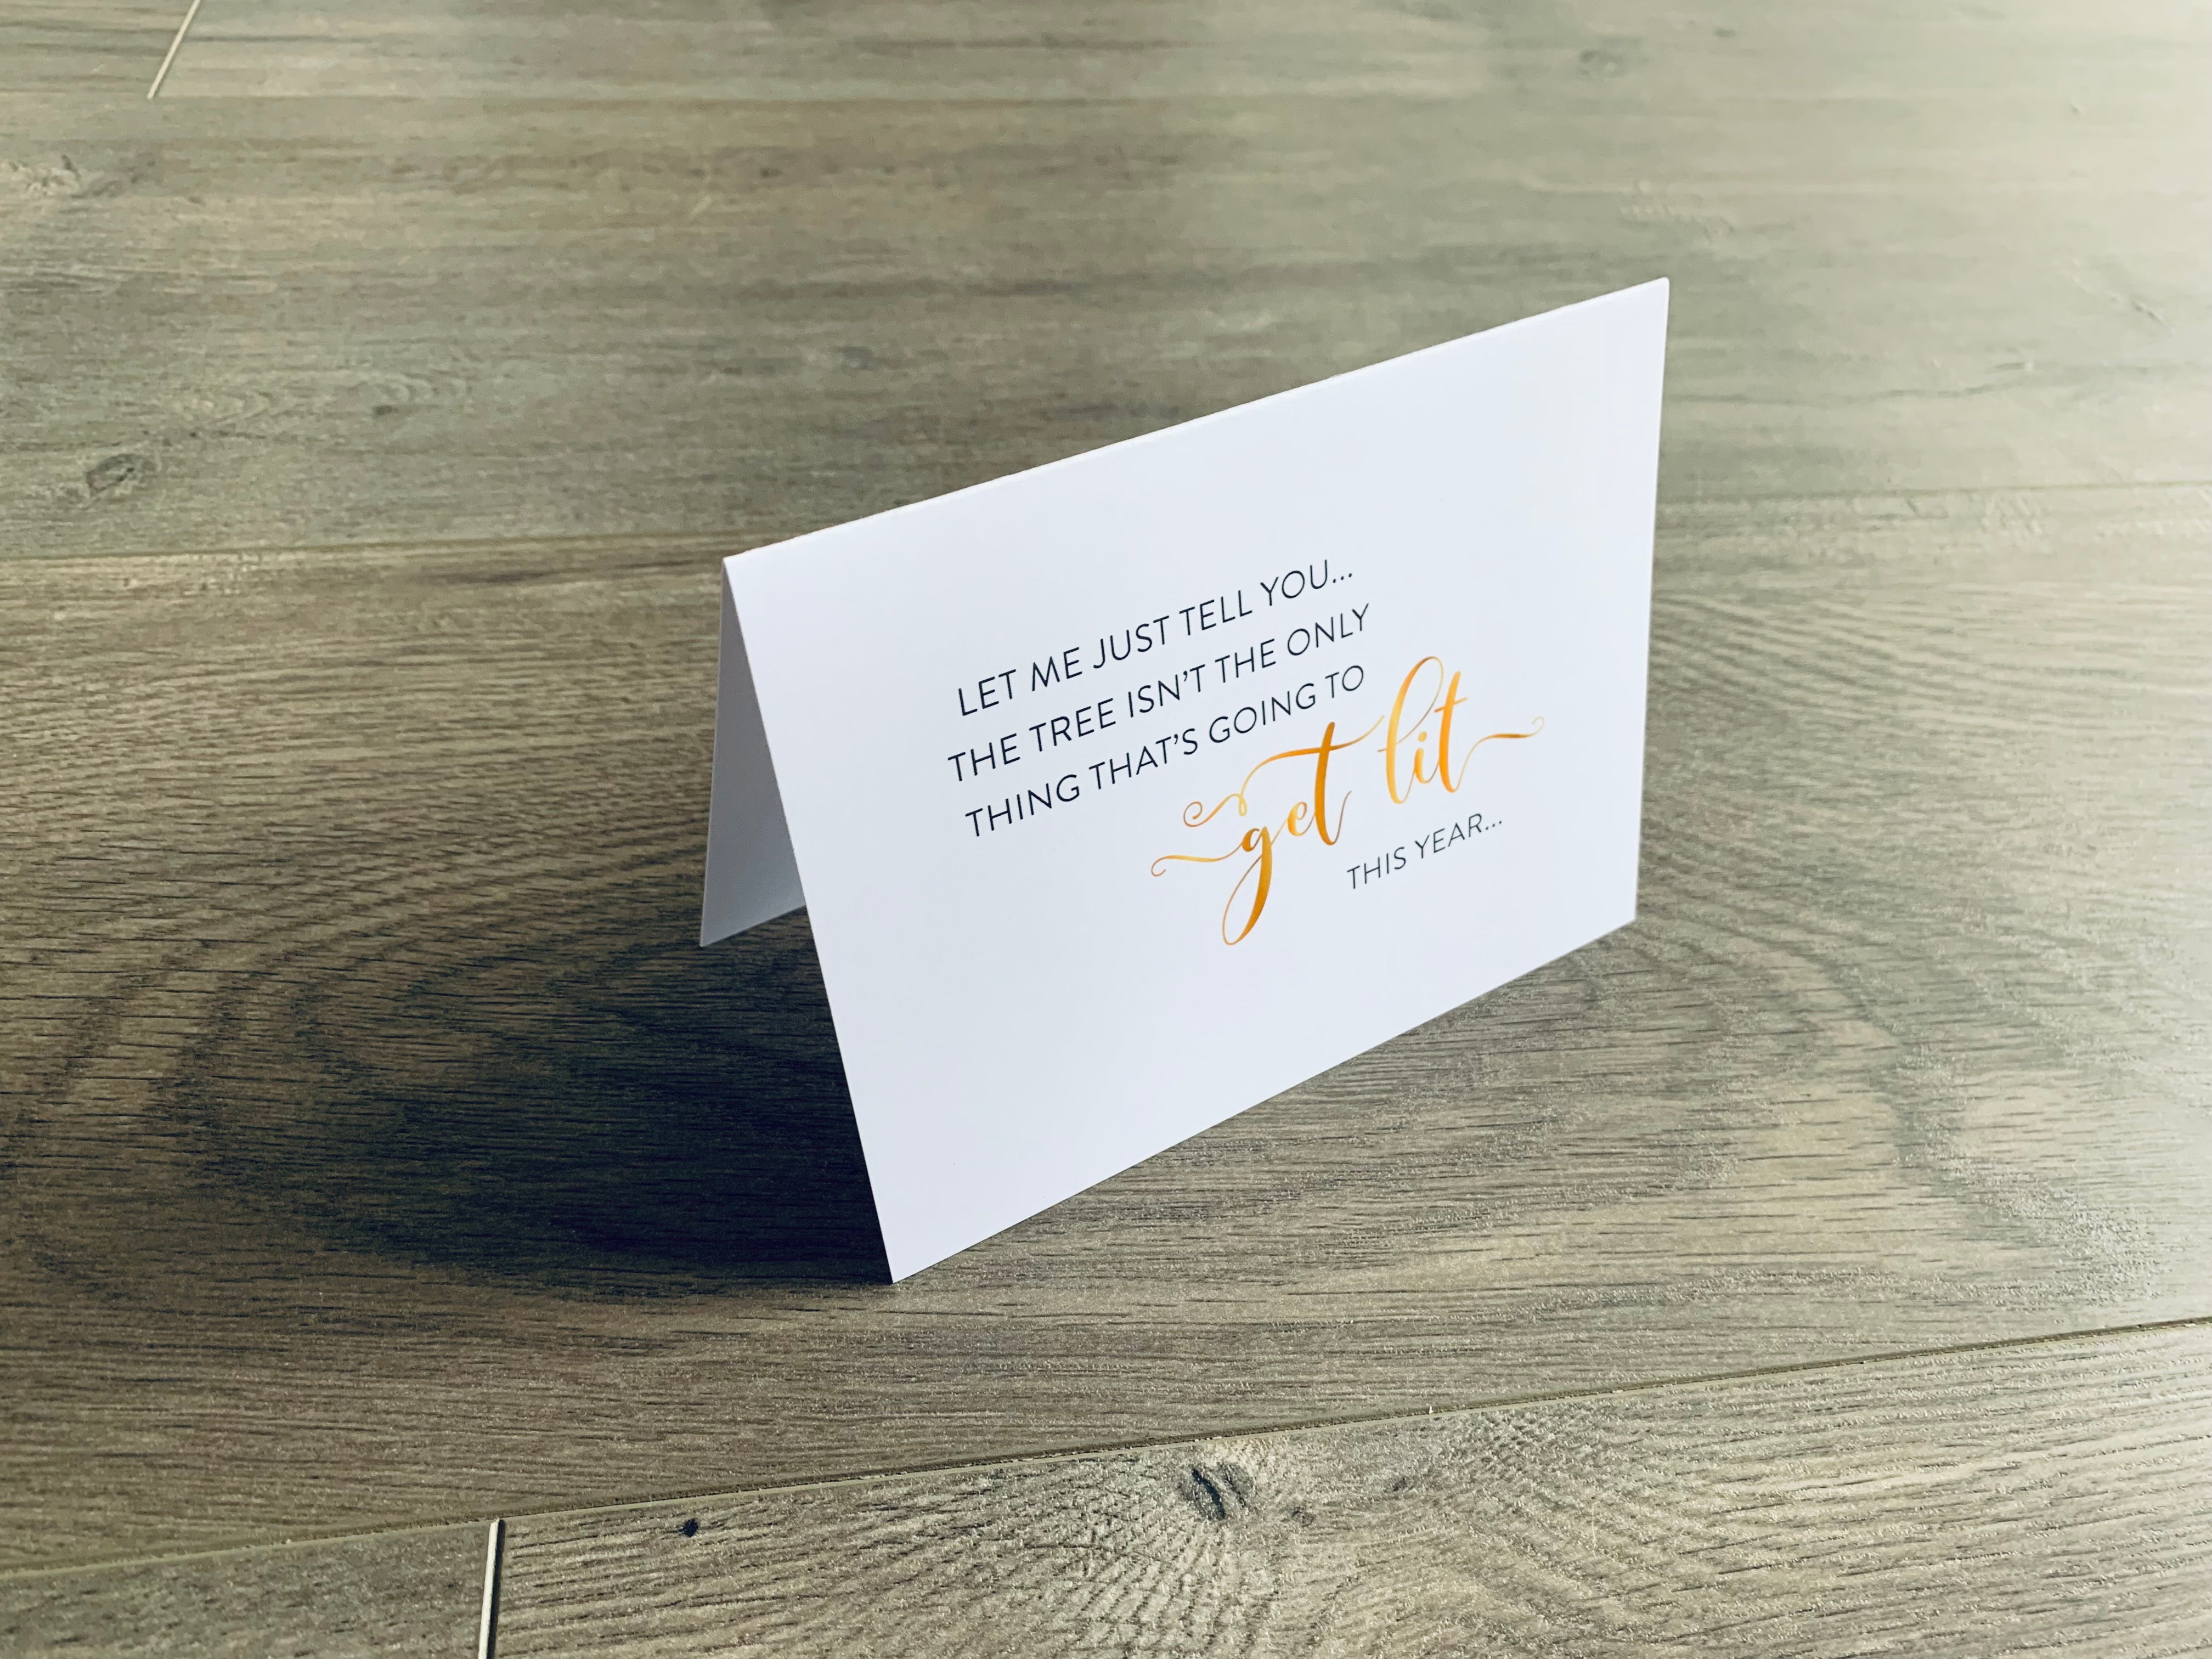 A white folded notecard is propped up on a wooden floor. On the front of the card, it says "Let me just tell you... the tree isn't the only thing that's going to get lit this year." Christmas Chuckles collection by Stationare.